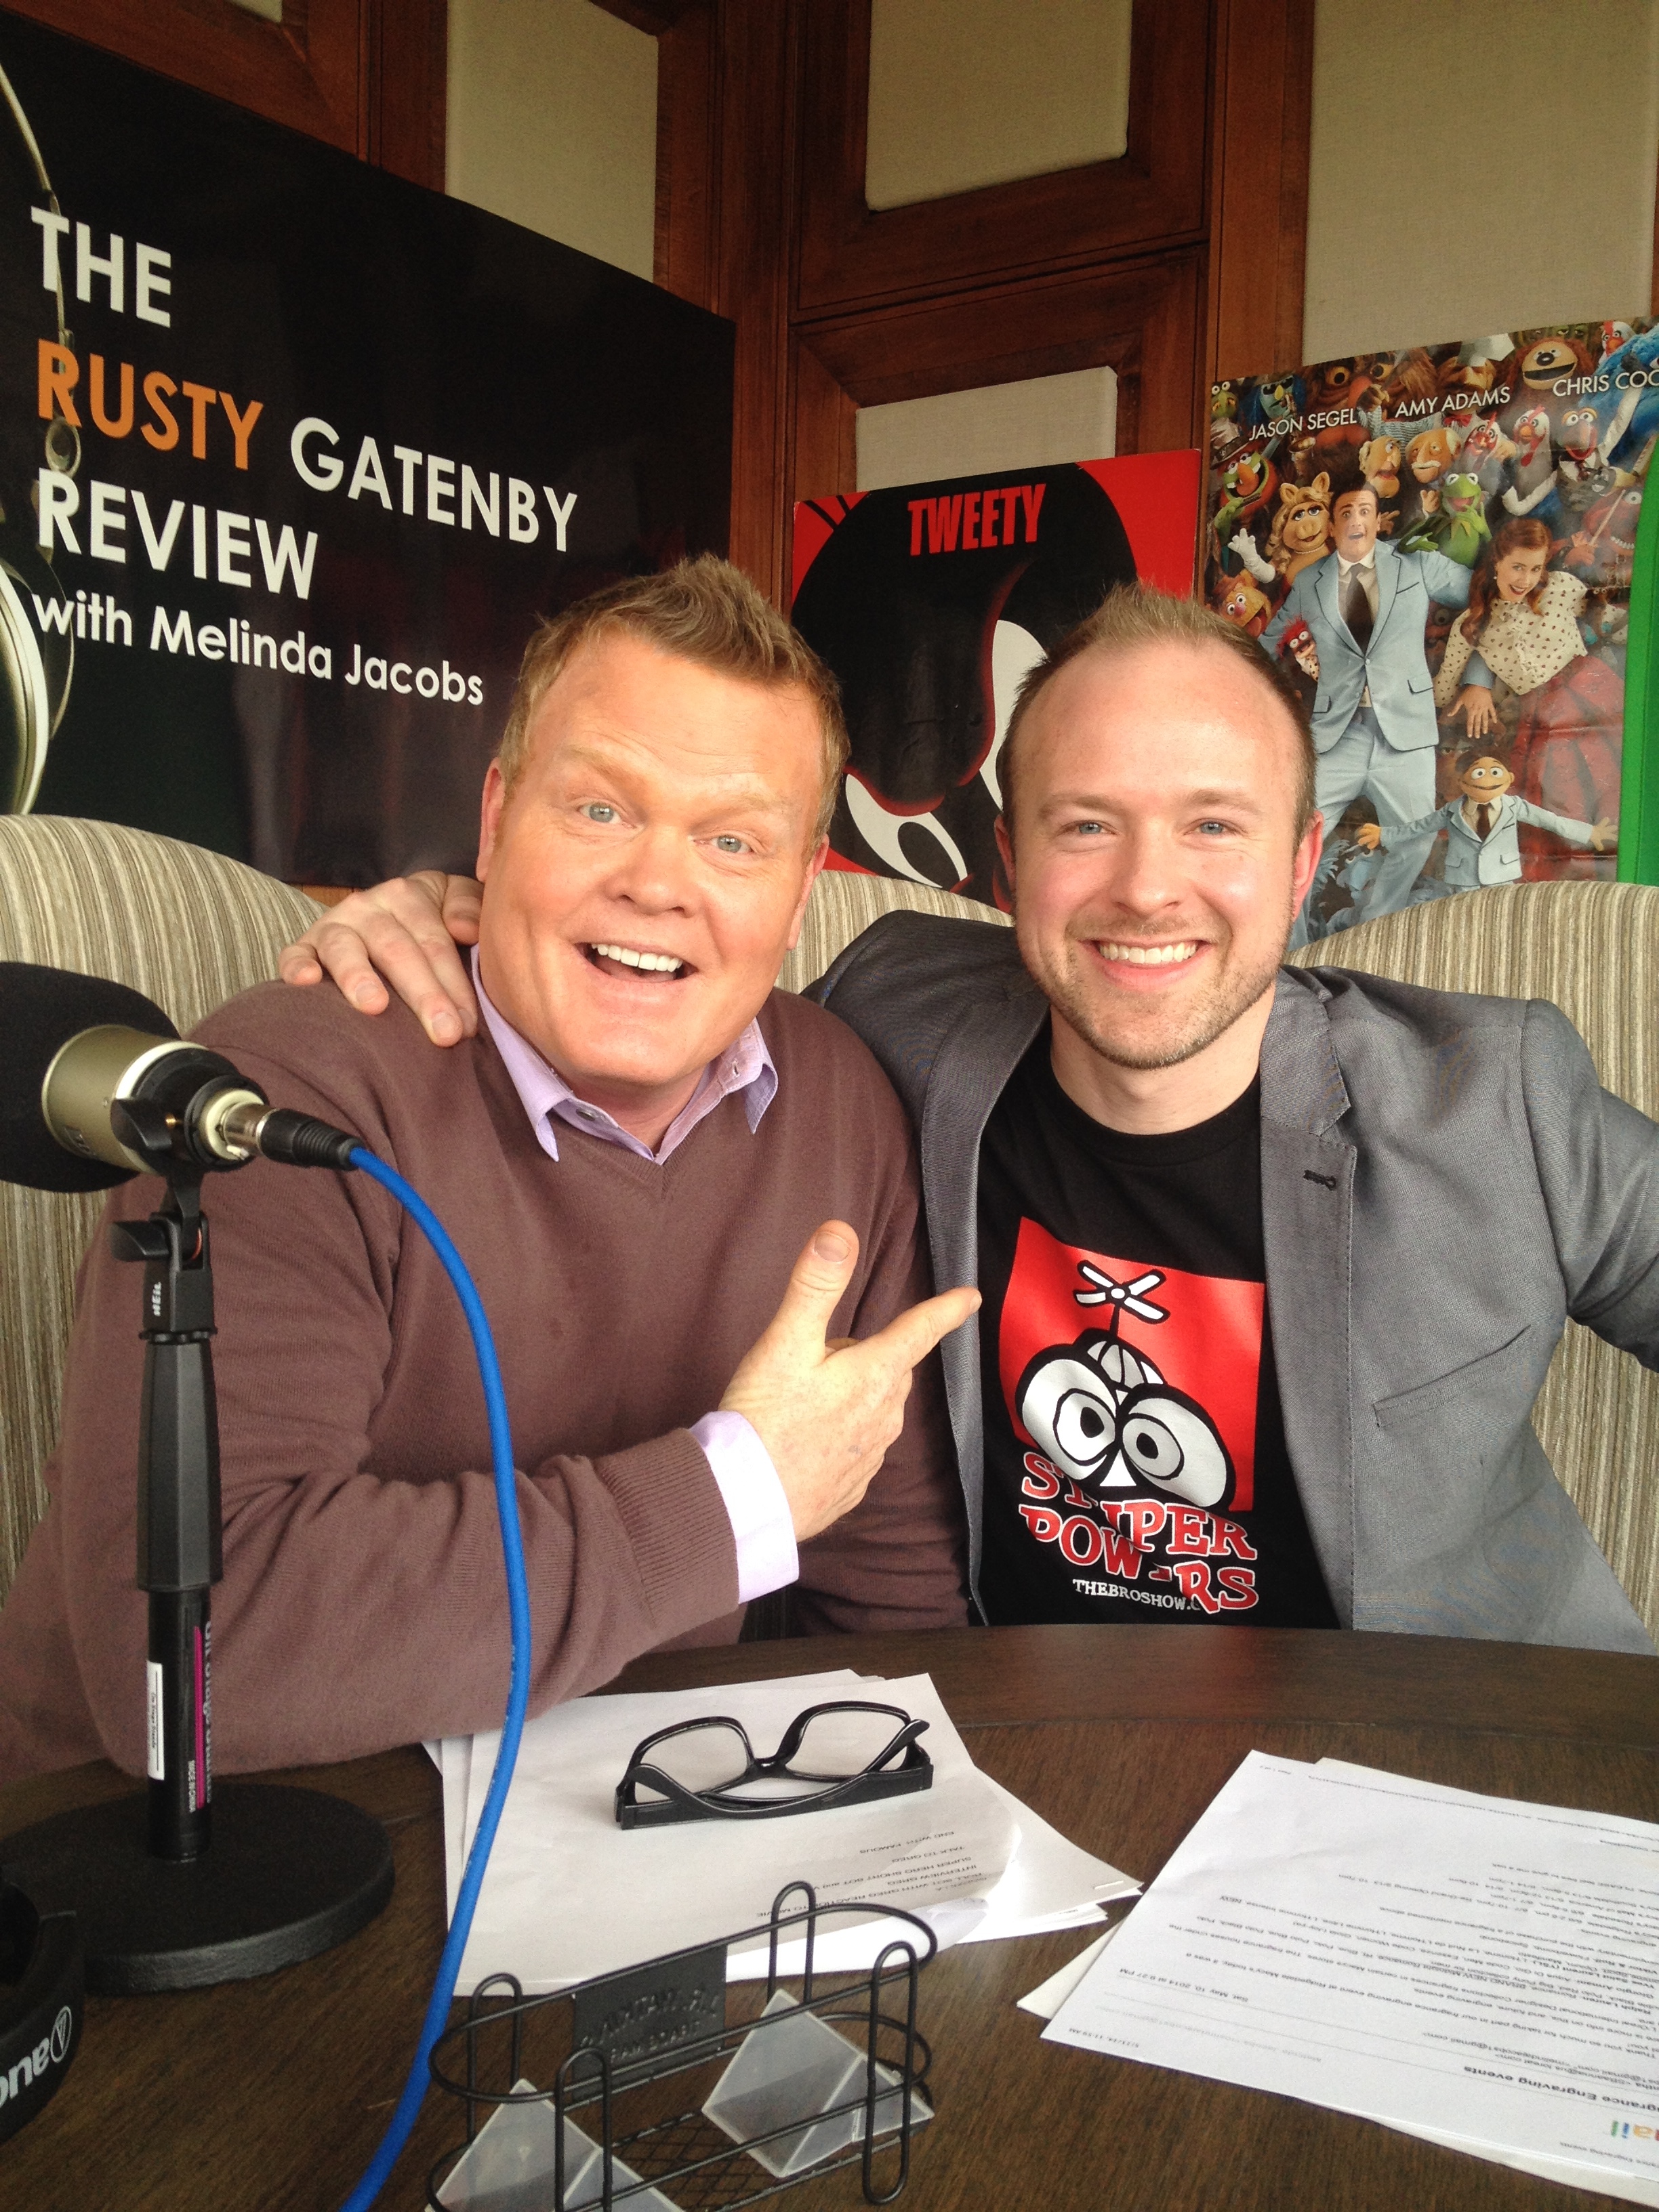 Greg Bro & Rusty Gatenby on The Rusty Gatenby Review Podcast